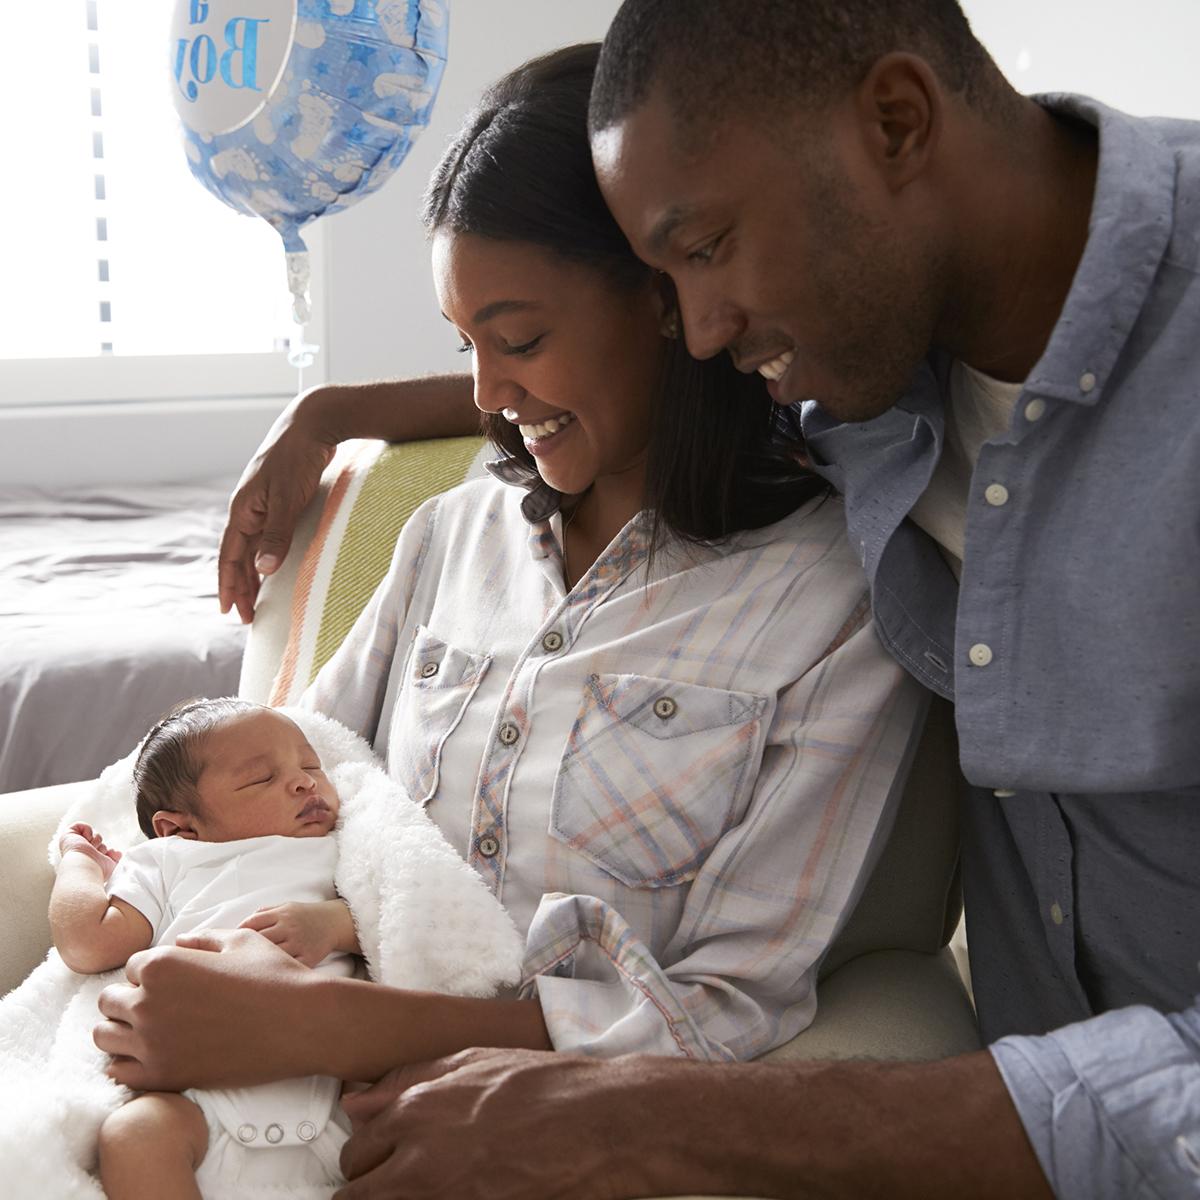 Parents and Baby - Birth Defects Prevention Options